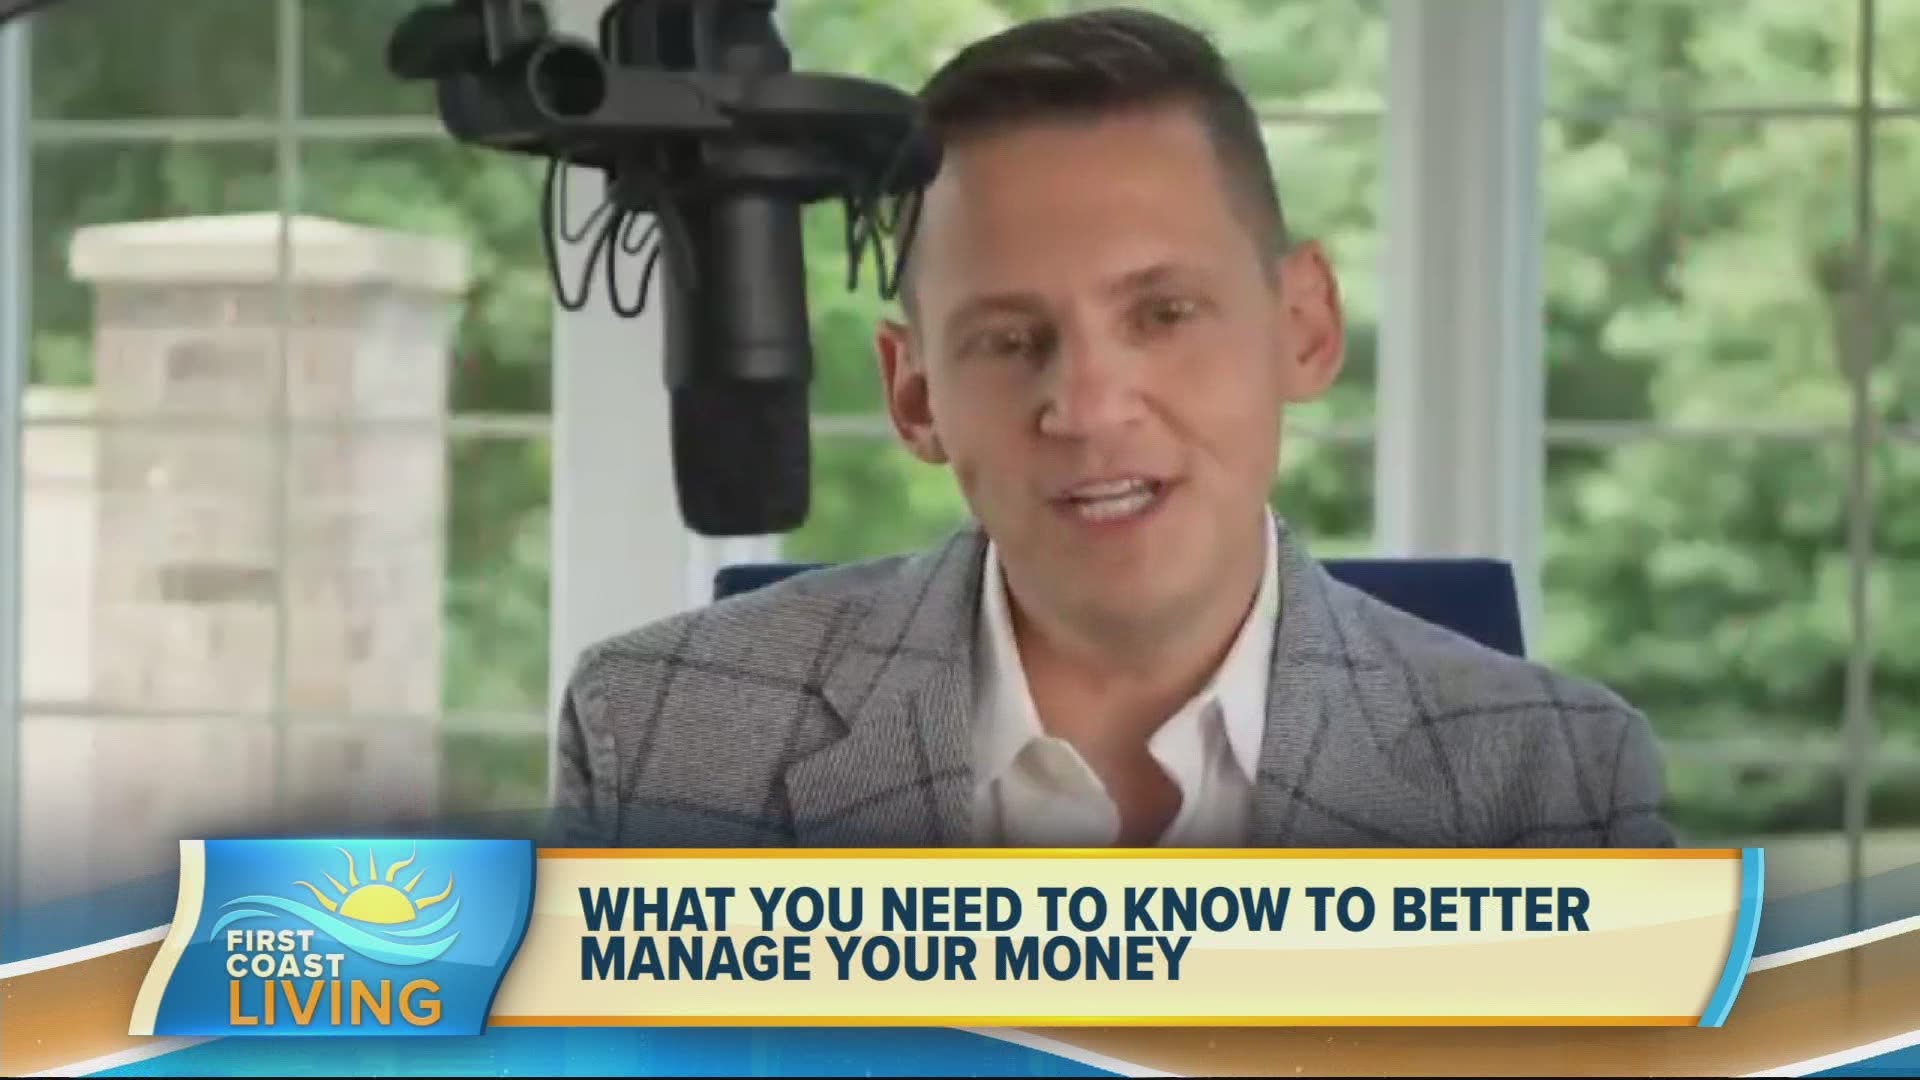 A money expert shares tips to better manage your finances